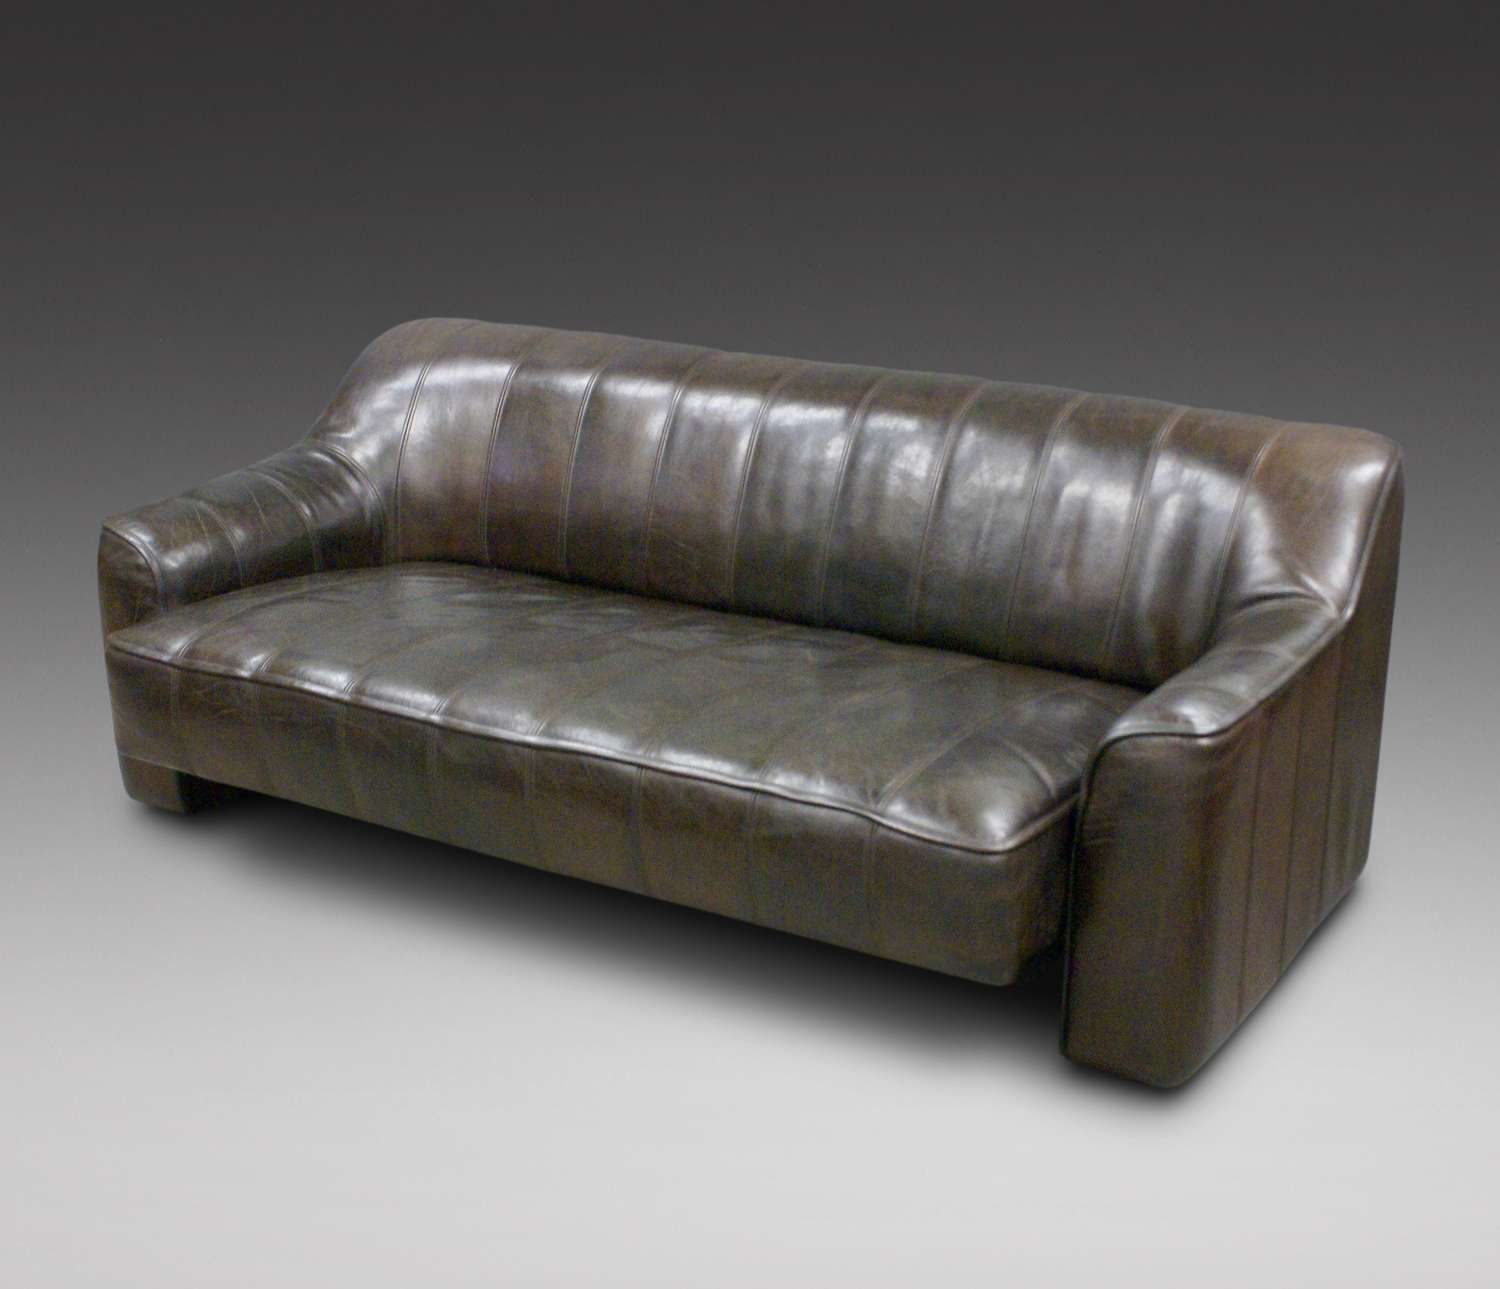 A Leather sofa, arm chair and foot stool by De Sede